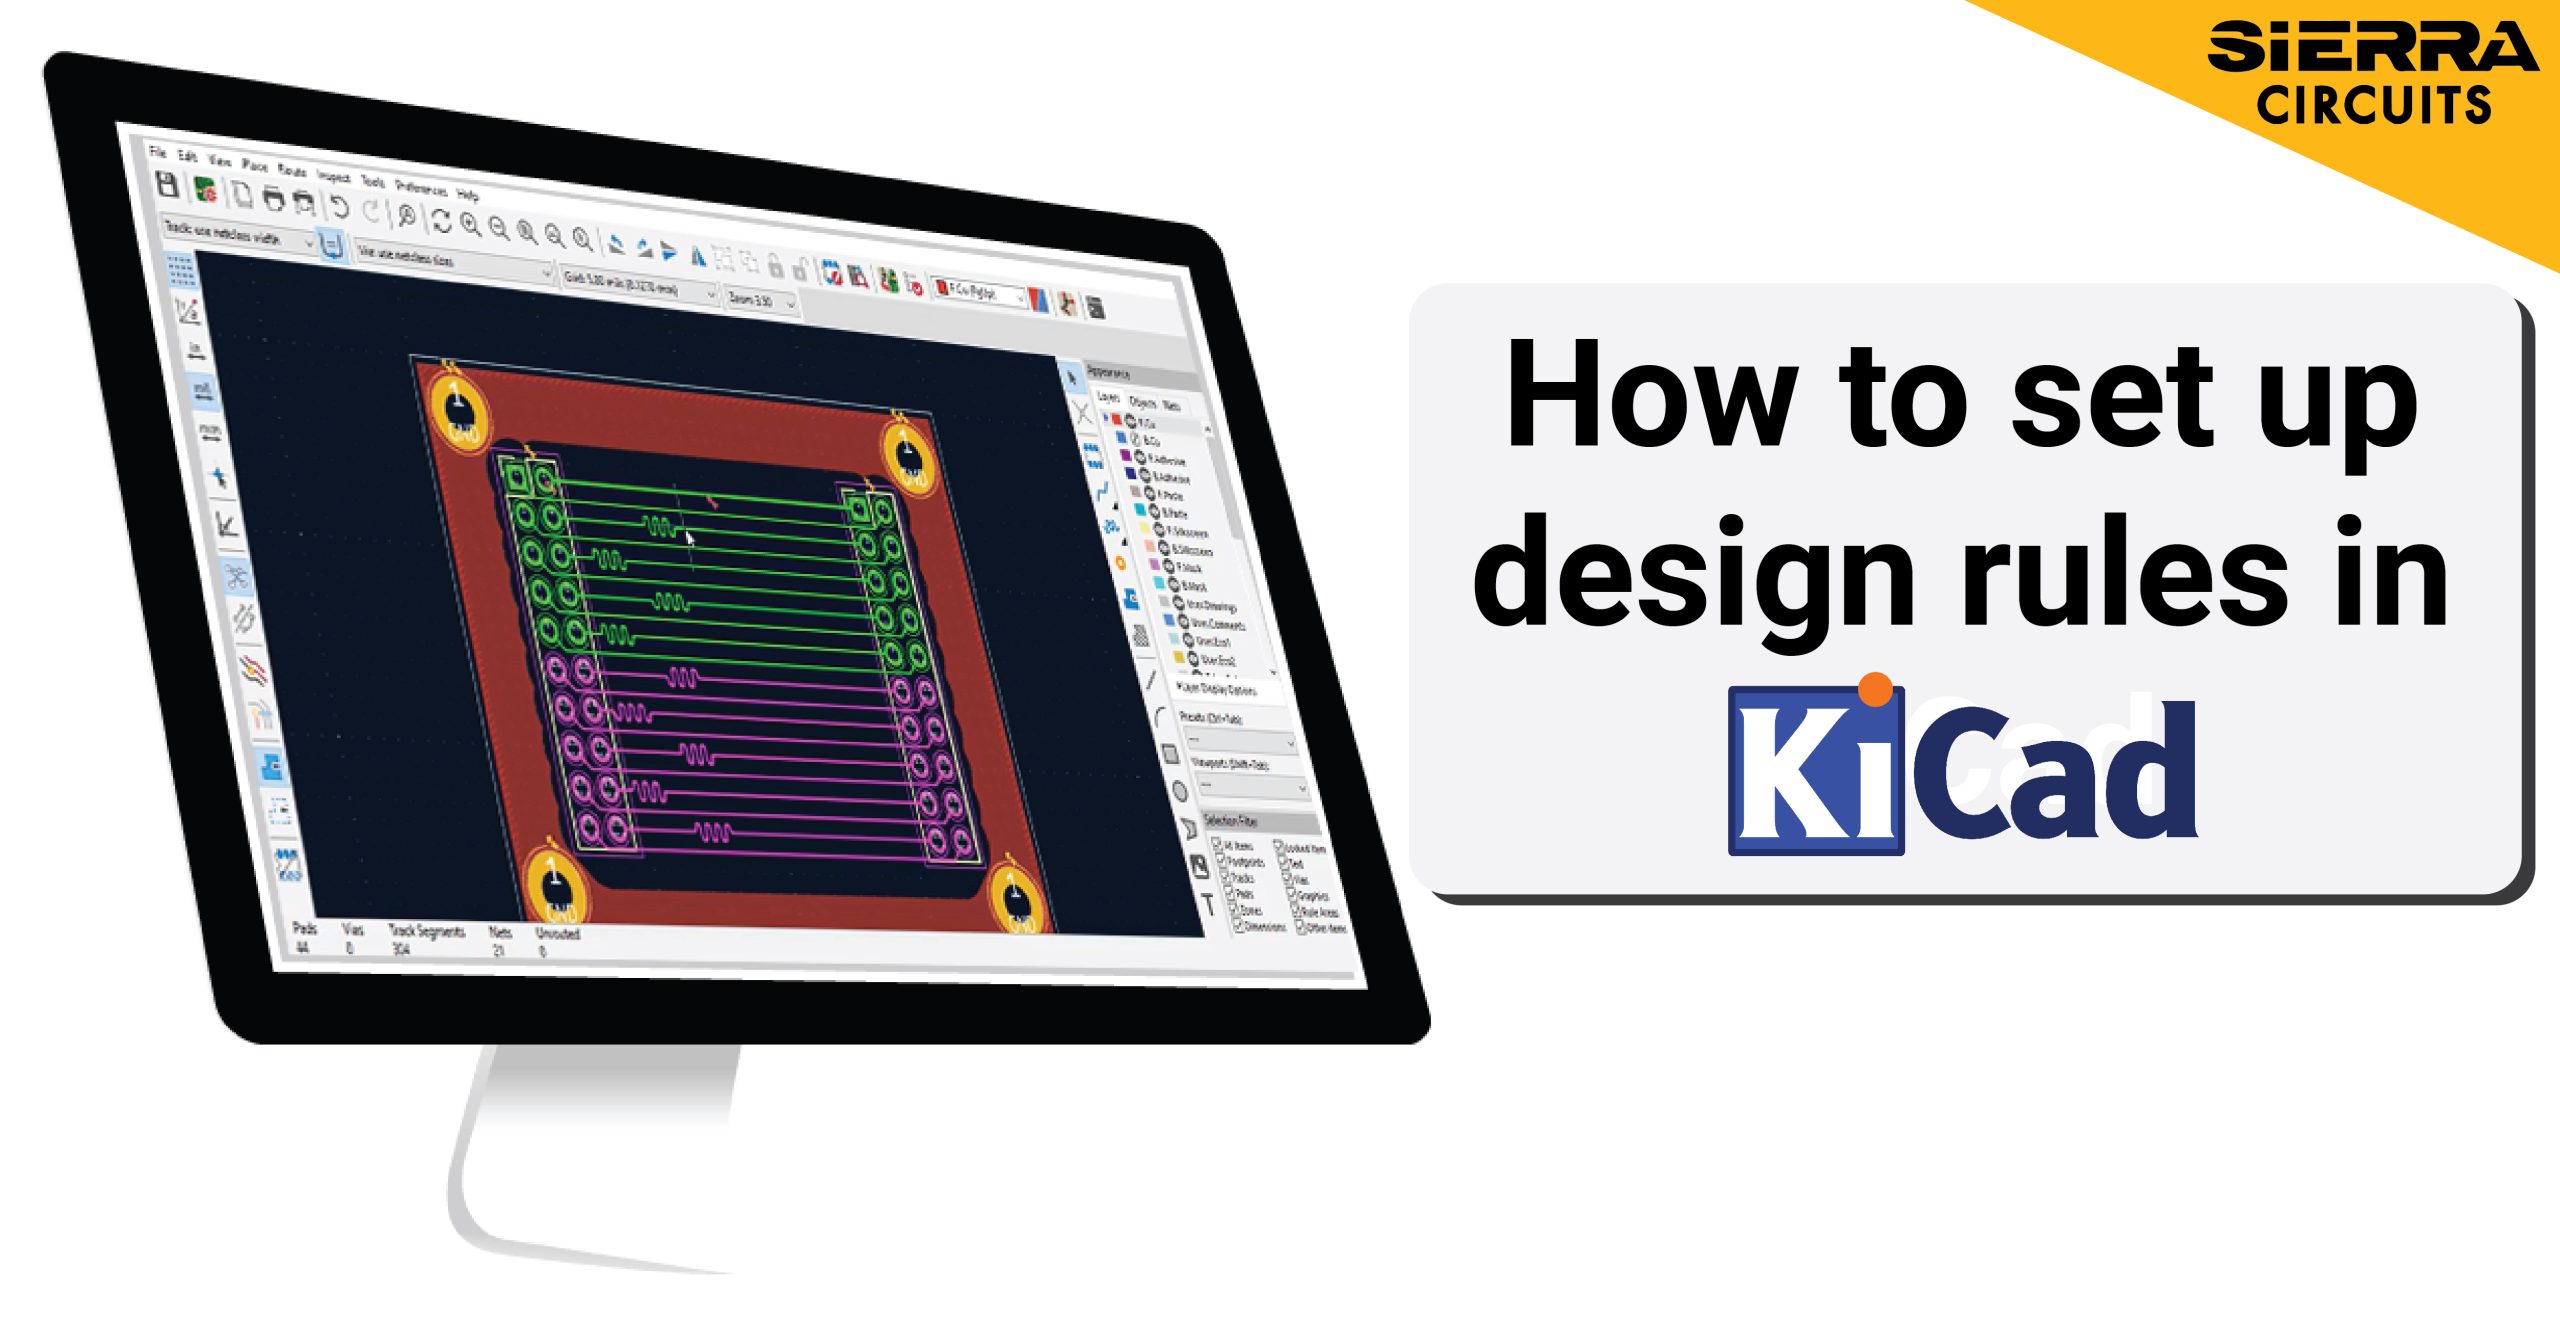 how-to-set-design-rules-in-kicad.jpg